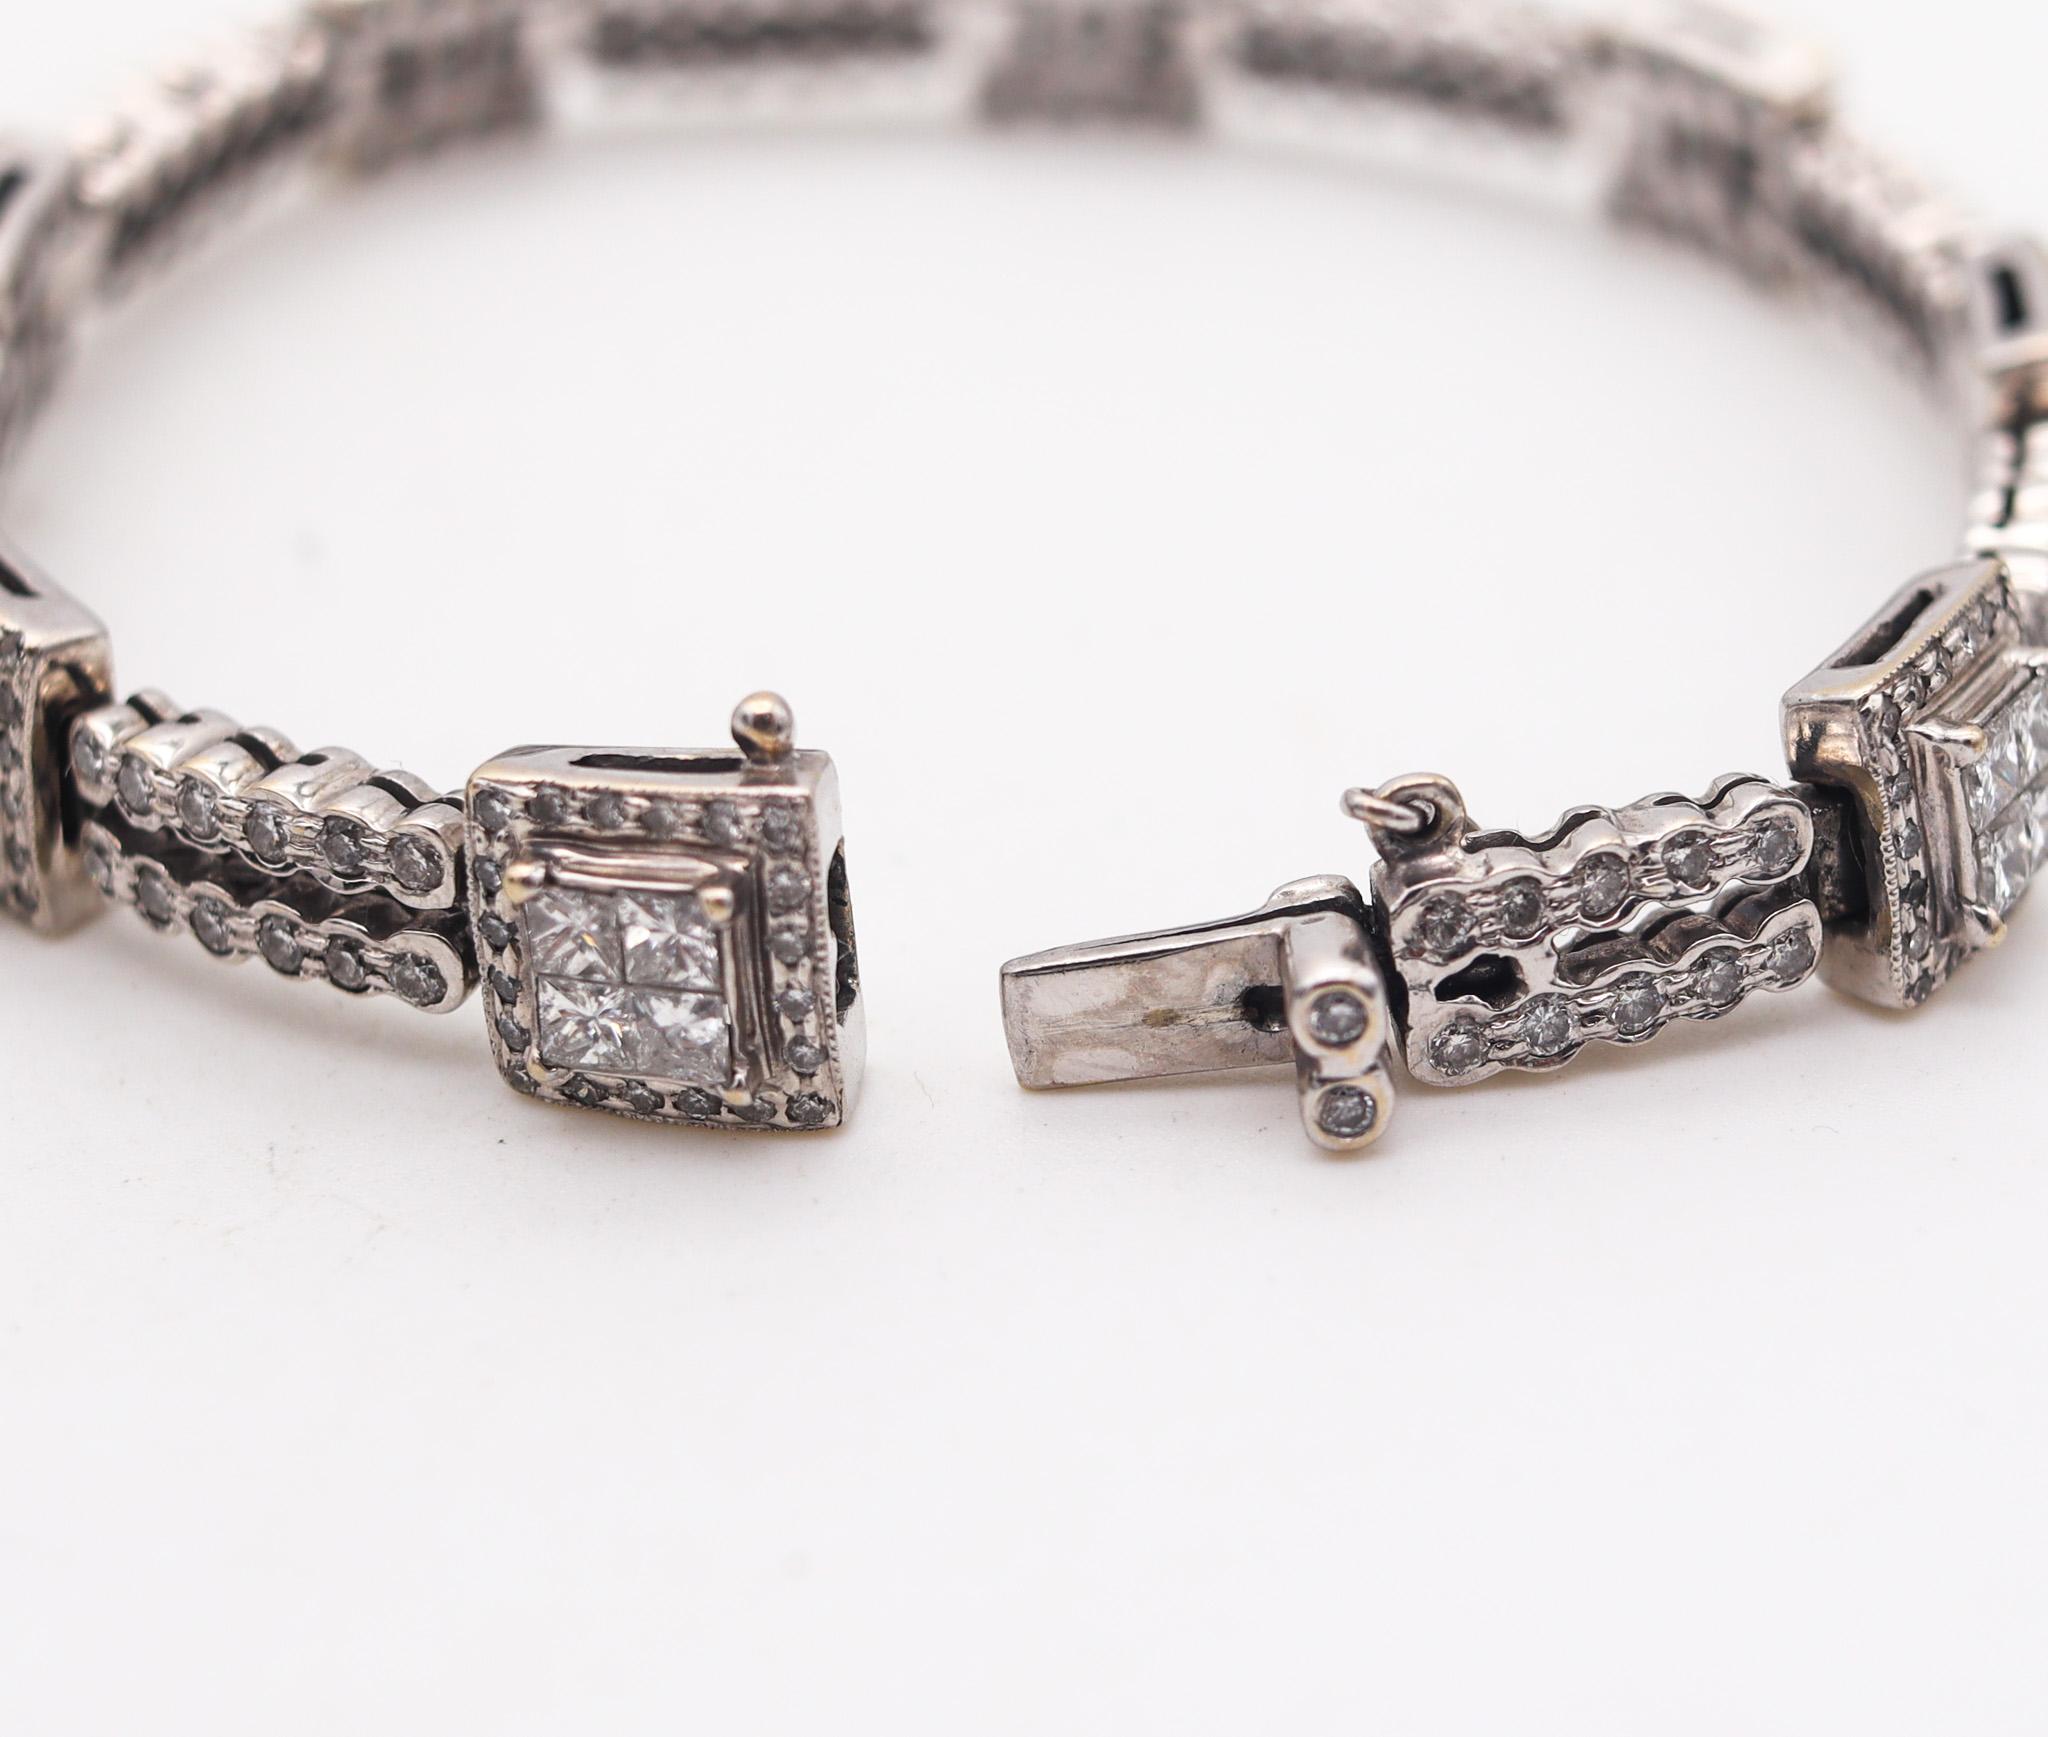 Italian Modernist Station Bracelet In 18Kt White Gold With 7.44 Ctw In Diamonds For Sale 1